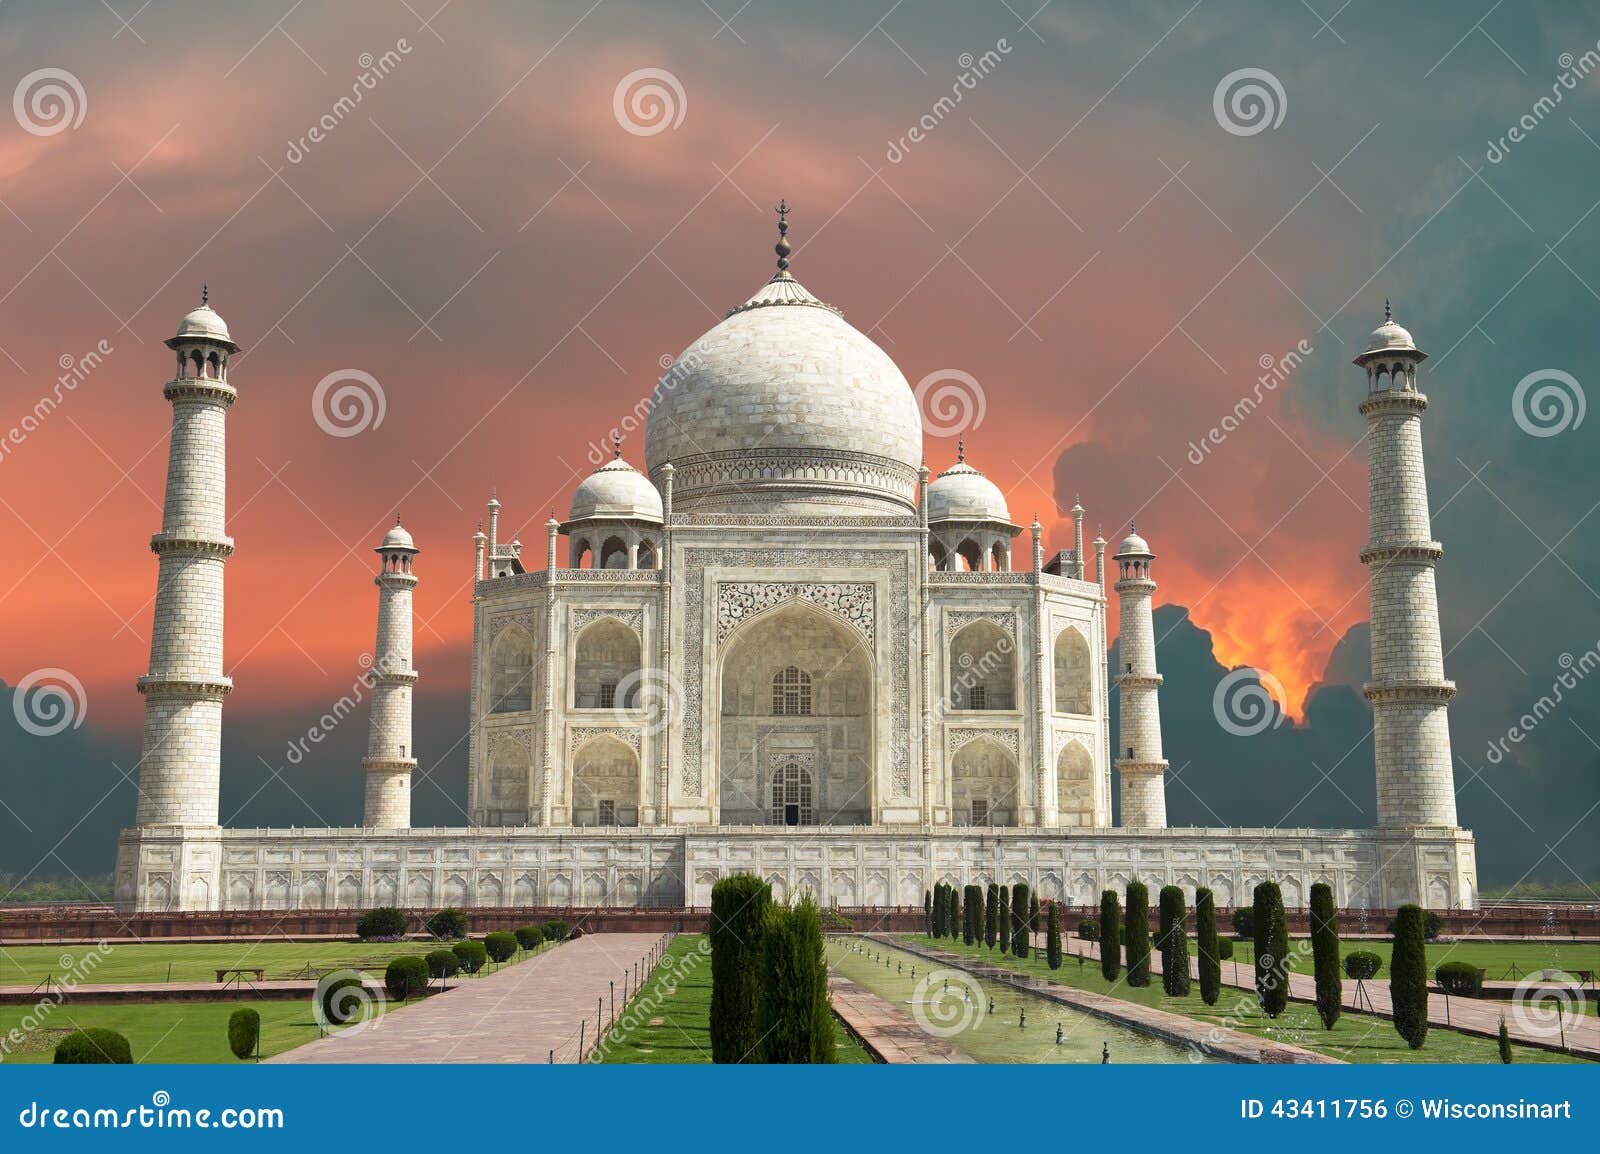 travel to agra, india, taj mahal and red stormy sky